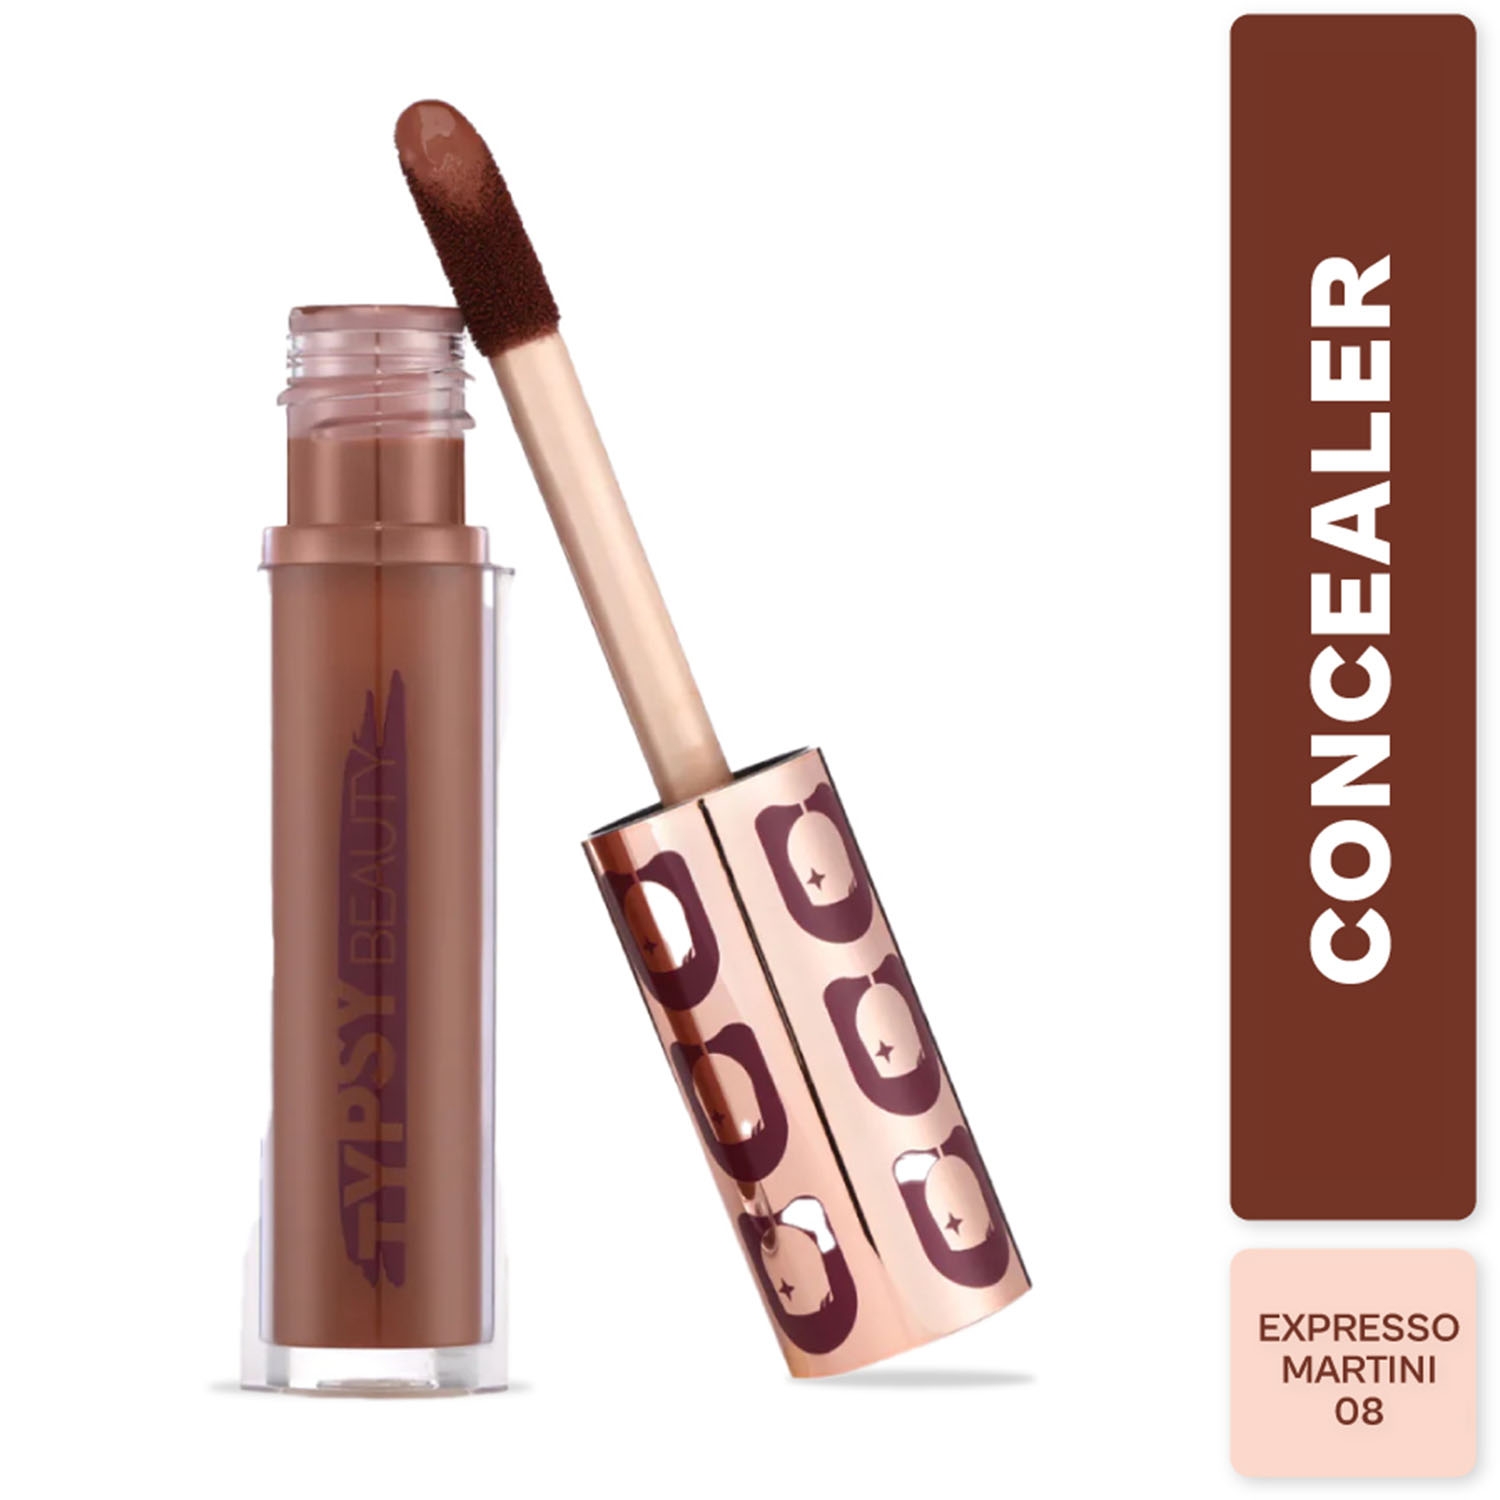 Typsy Beauty | Typsy Beauty Hangover Proof Full Coverage Concealer - 08 Espresso Martini (5.8g)